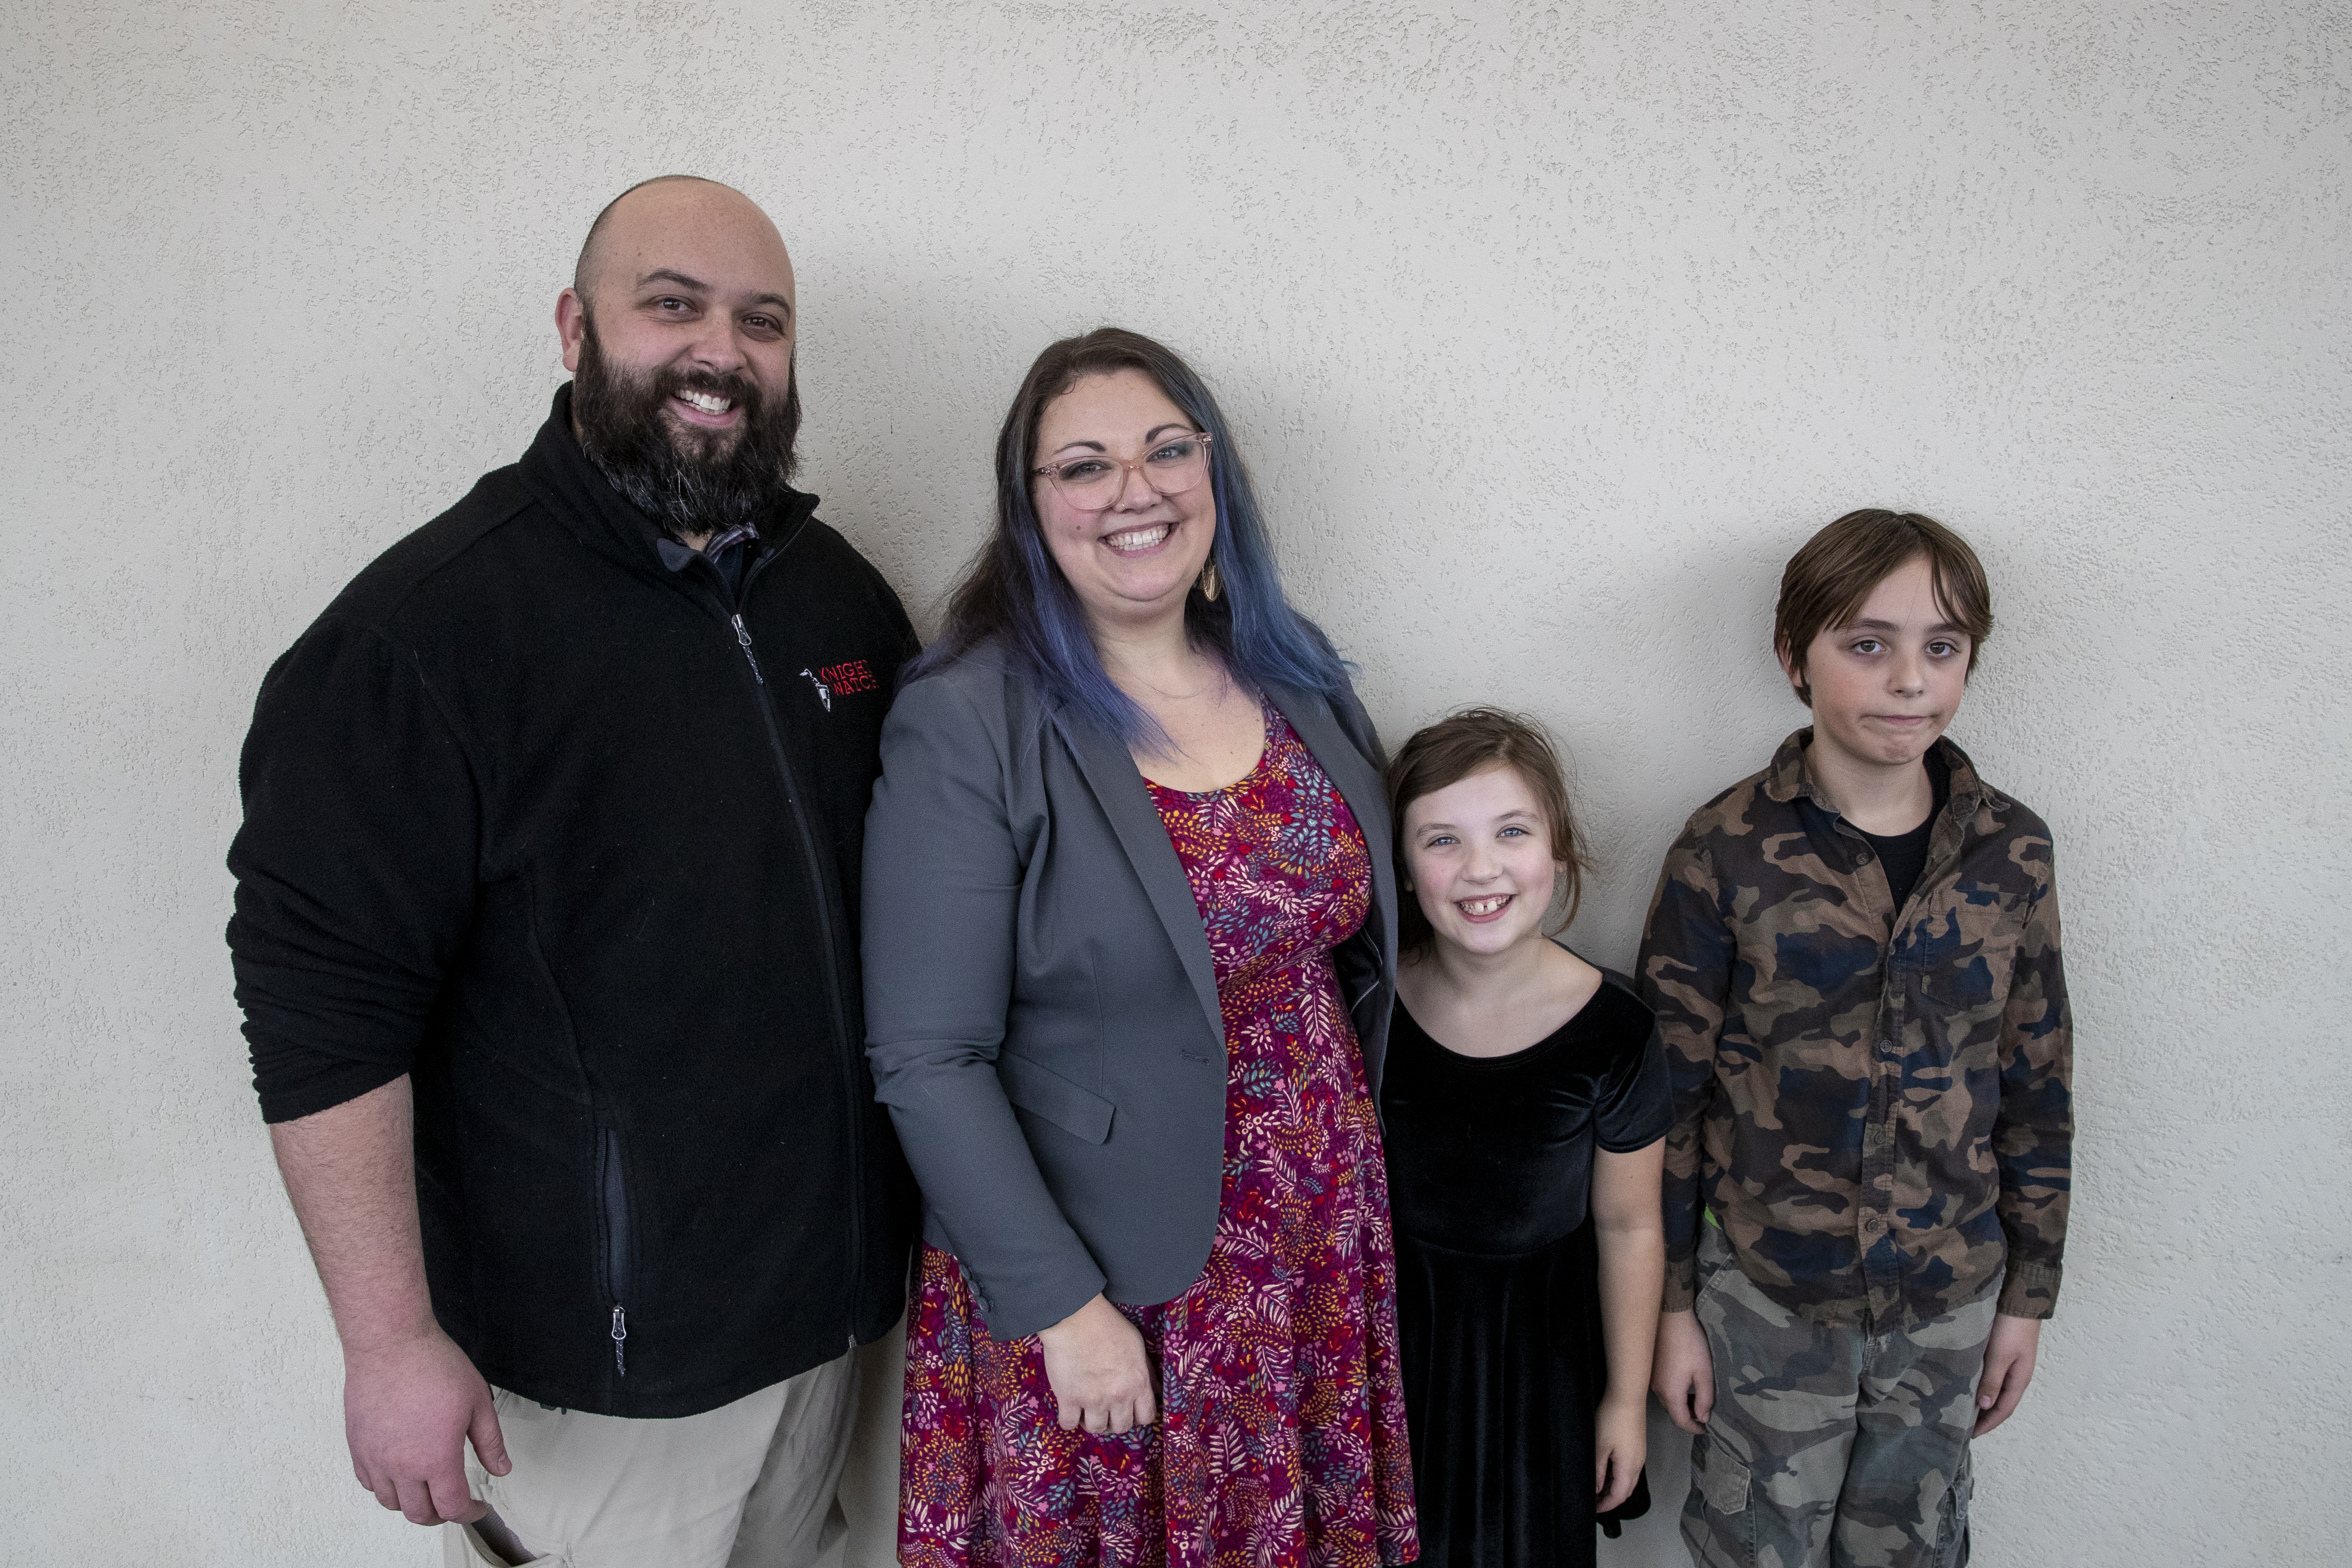 Lauren Vermilye poses for a picture with her husband, Jonathan, and children, Tristan, 11, and Victoria, 8, during Adoption Day at the Kent County Courthouse in Grand Rapids on Thursday, Dec. 8, 2022. Tammy and Jordan Myers are the biological parents of 1-year-old twins Eames and Ellison. Lauren Vermilye, a surrogate, gave birth to the twins after Tammy went through breast cancer treatment and has no claim to the babies. The Myers family was able to adopt the twins after convincing the court system to grant them custody. (Cory Morse | MLive.com)